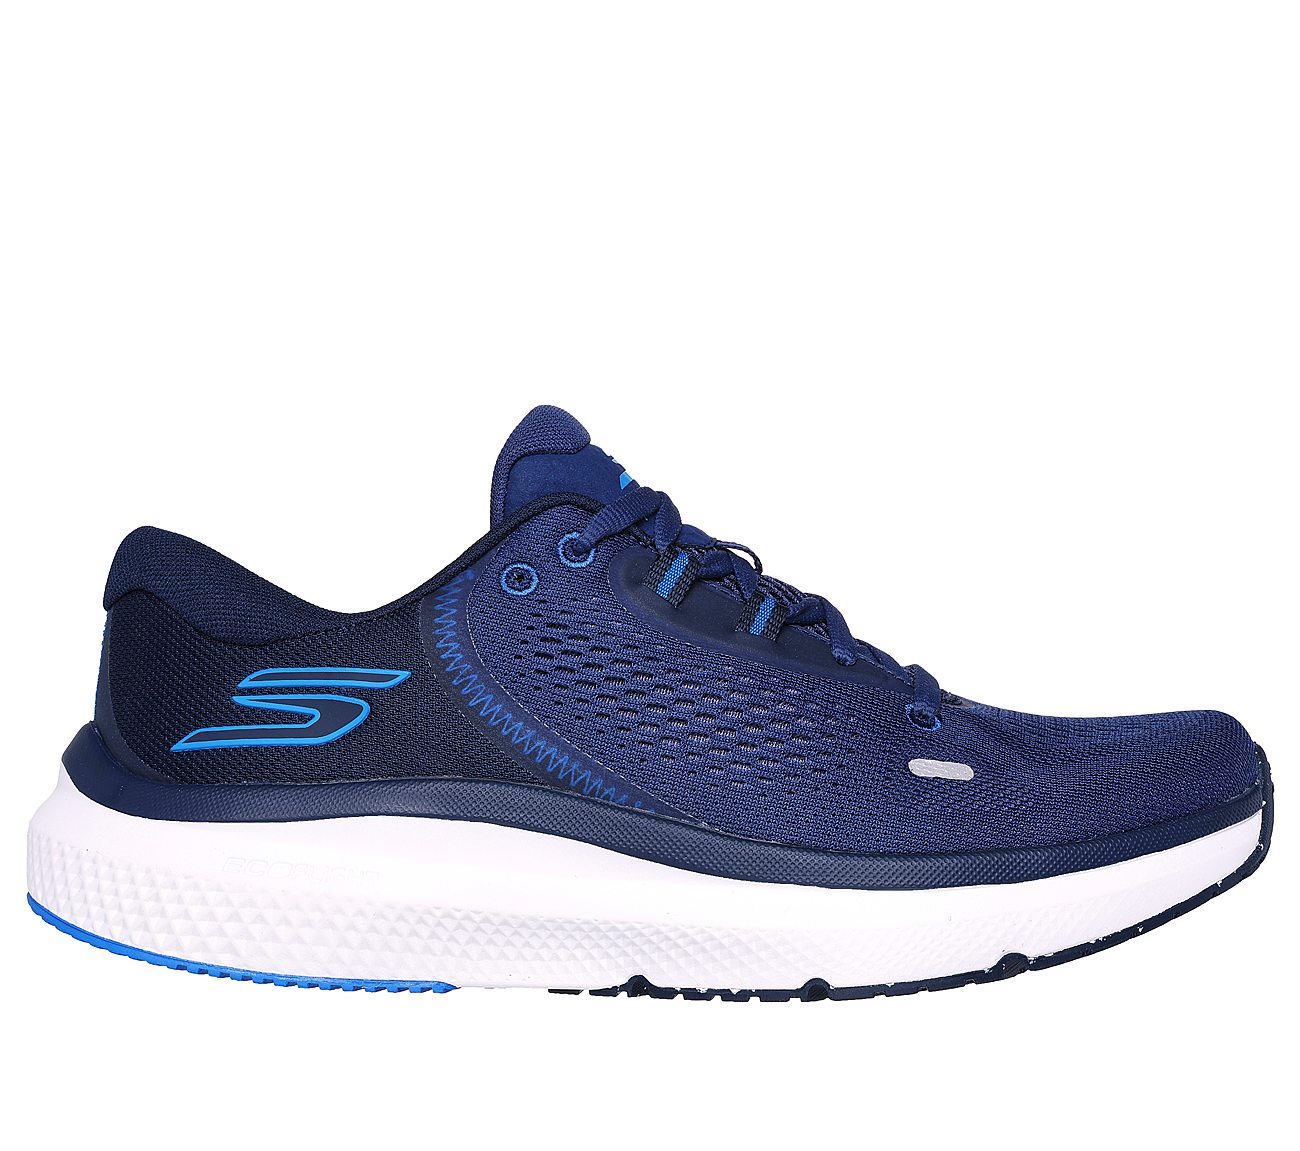 GO RUN PURE 4, NAVY/BLUE Footwear Lateral View